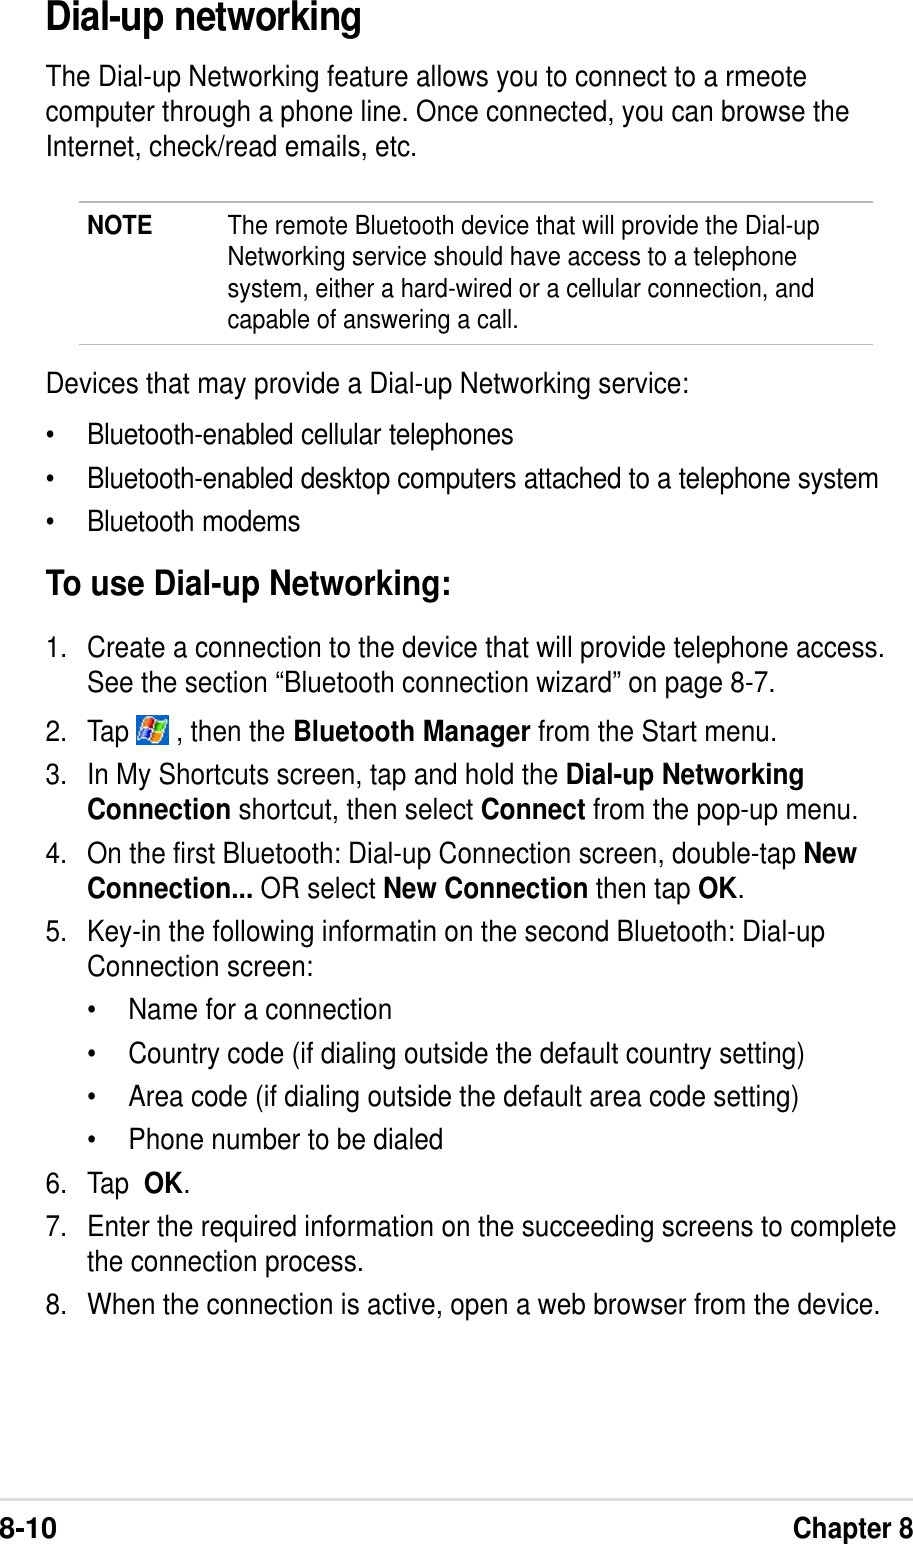 8-10Chapter 8Dial-up networkingThe Dial-up Networking feature allows you to connect to a rmeotecomputer through a phone line. Once connected, you can browse theInternet, check/read emails, etc.NOTE The remote Bluetooth device that will provide the Dial-upNetworking service should have access to a telephonesystem, either a hard-wired or a cellular connection, andcapable of answering a call.Devices that may provide a Dial-up Networking service:•Bluetooth-enabled cellular telephones•Bluetooth-enabled desktop computers attached to a telephone system•Bluetooth modemsTo use Dial-up Networking:1. Create a connection to the device that will provide telephone access.See the section “Bluetooth connection wizard” on page 8-7.2. Tap   , then the Bluetooth Manager from the Start menu.3. In My Shortcuts screen, tap and hold the Dial-up NetworkingConnection shortcut, then select Connect from the pop-up menu.4. On the first Bluetooth: Dial-up Connection screen, double-tap NewConnection... OR select New Connection then tap OK.5. Key-in the following informatin on the second Bluetooth: Dial-upConnection screen:•Name for a connection•Country code (if dialing outside the default country setting)•Area code (if dialing outside the default area code setting)•Phone number to be dialed6. Tap  OK.7. Enter the required information on the succeeding screens to completethe connection process.8. When the connection is active, open a web browser from the device.